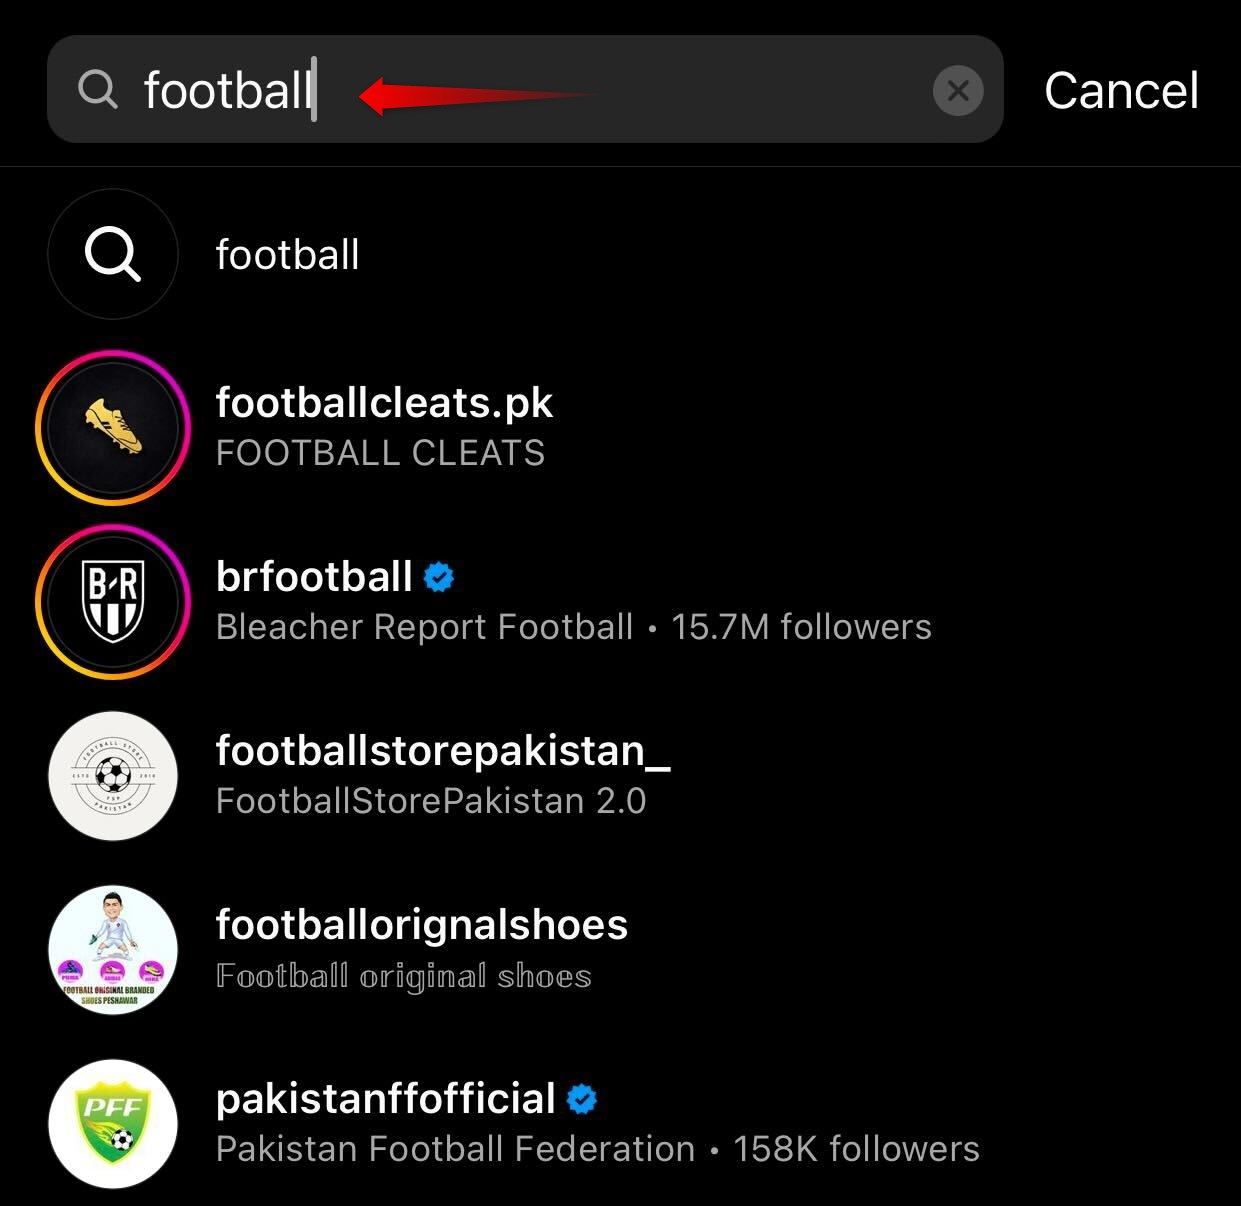 Searching for an account by searching by a keyword on Instagram.